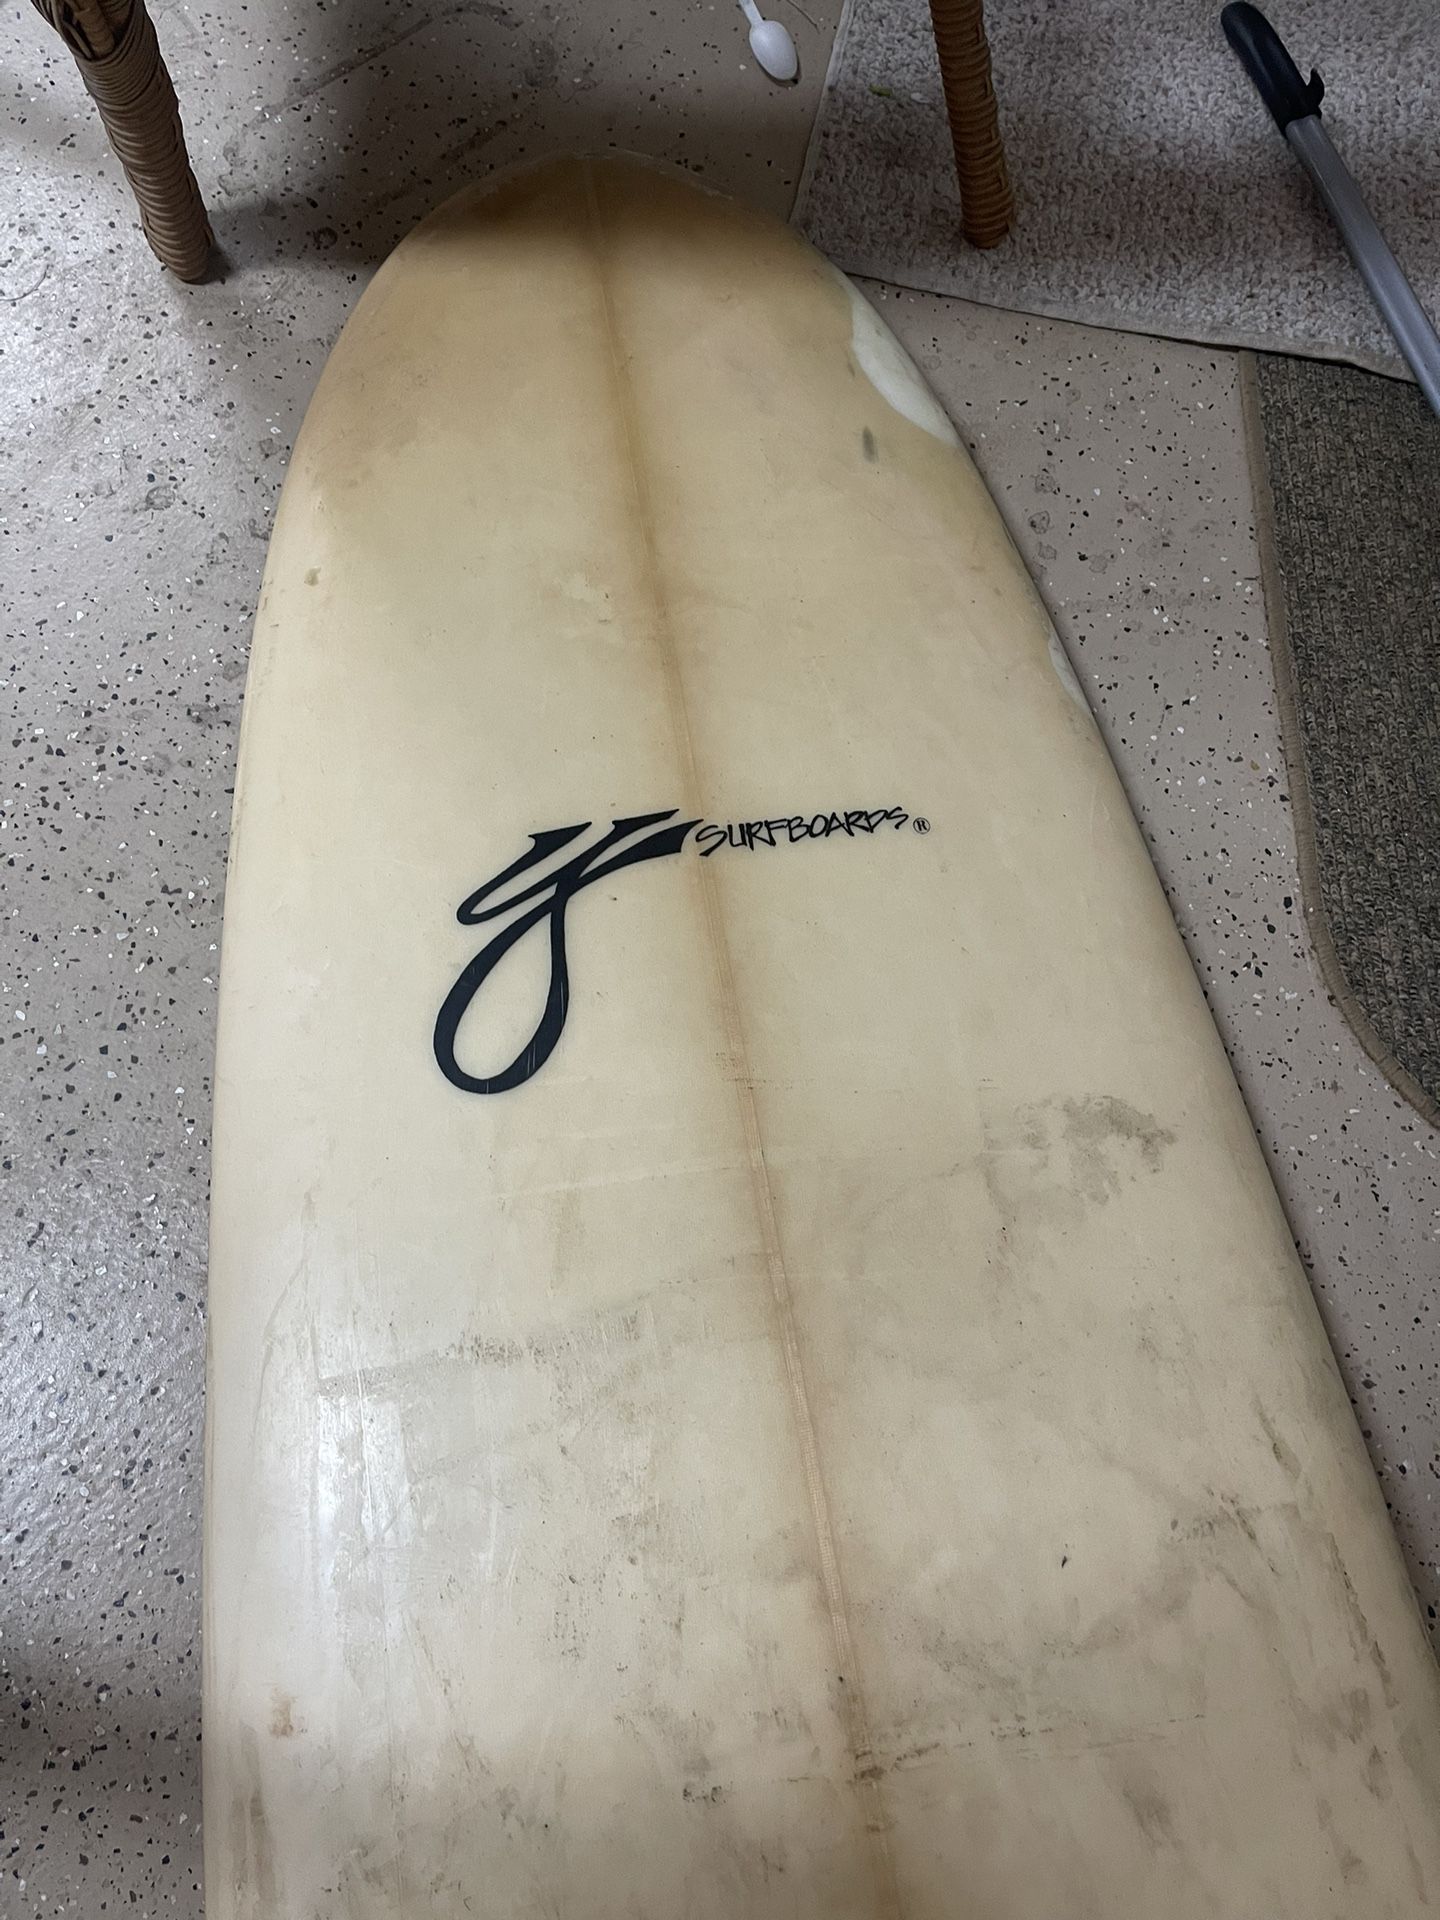 Vintage Ricky Young Out Of  Bellevue, Washington Surfboard For Sale, 9 Foot Longboard